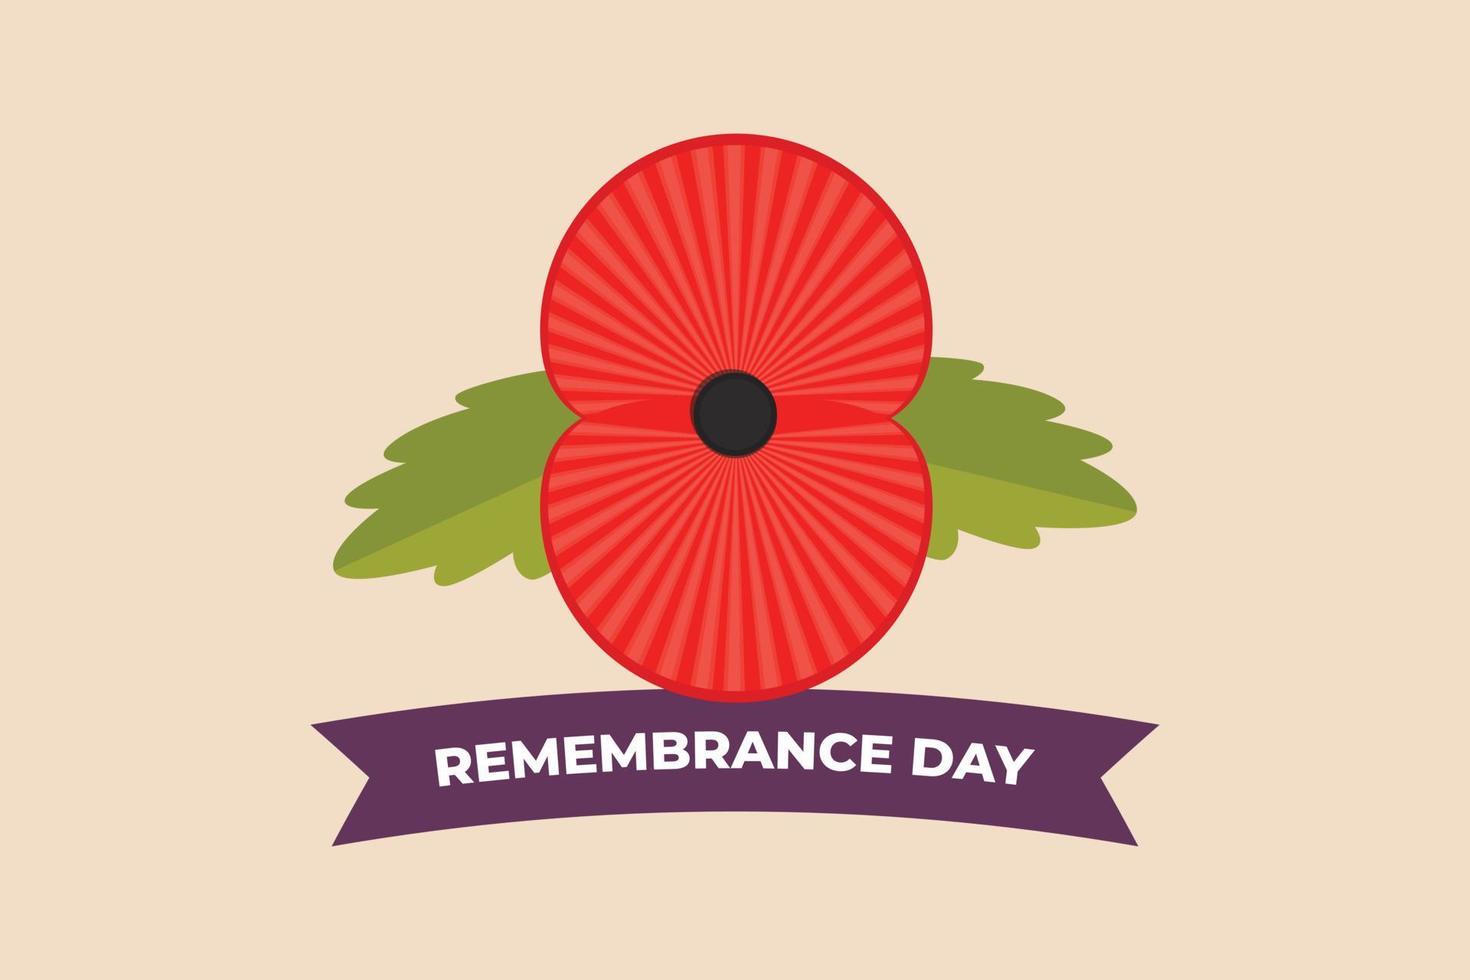 Remembrance day for the Victims of World War II. Poppy symbol of memory. Vector illustration.